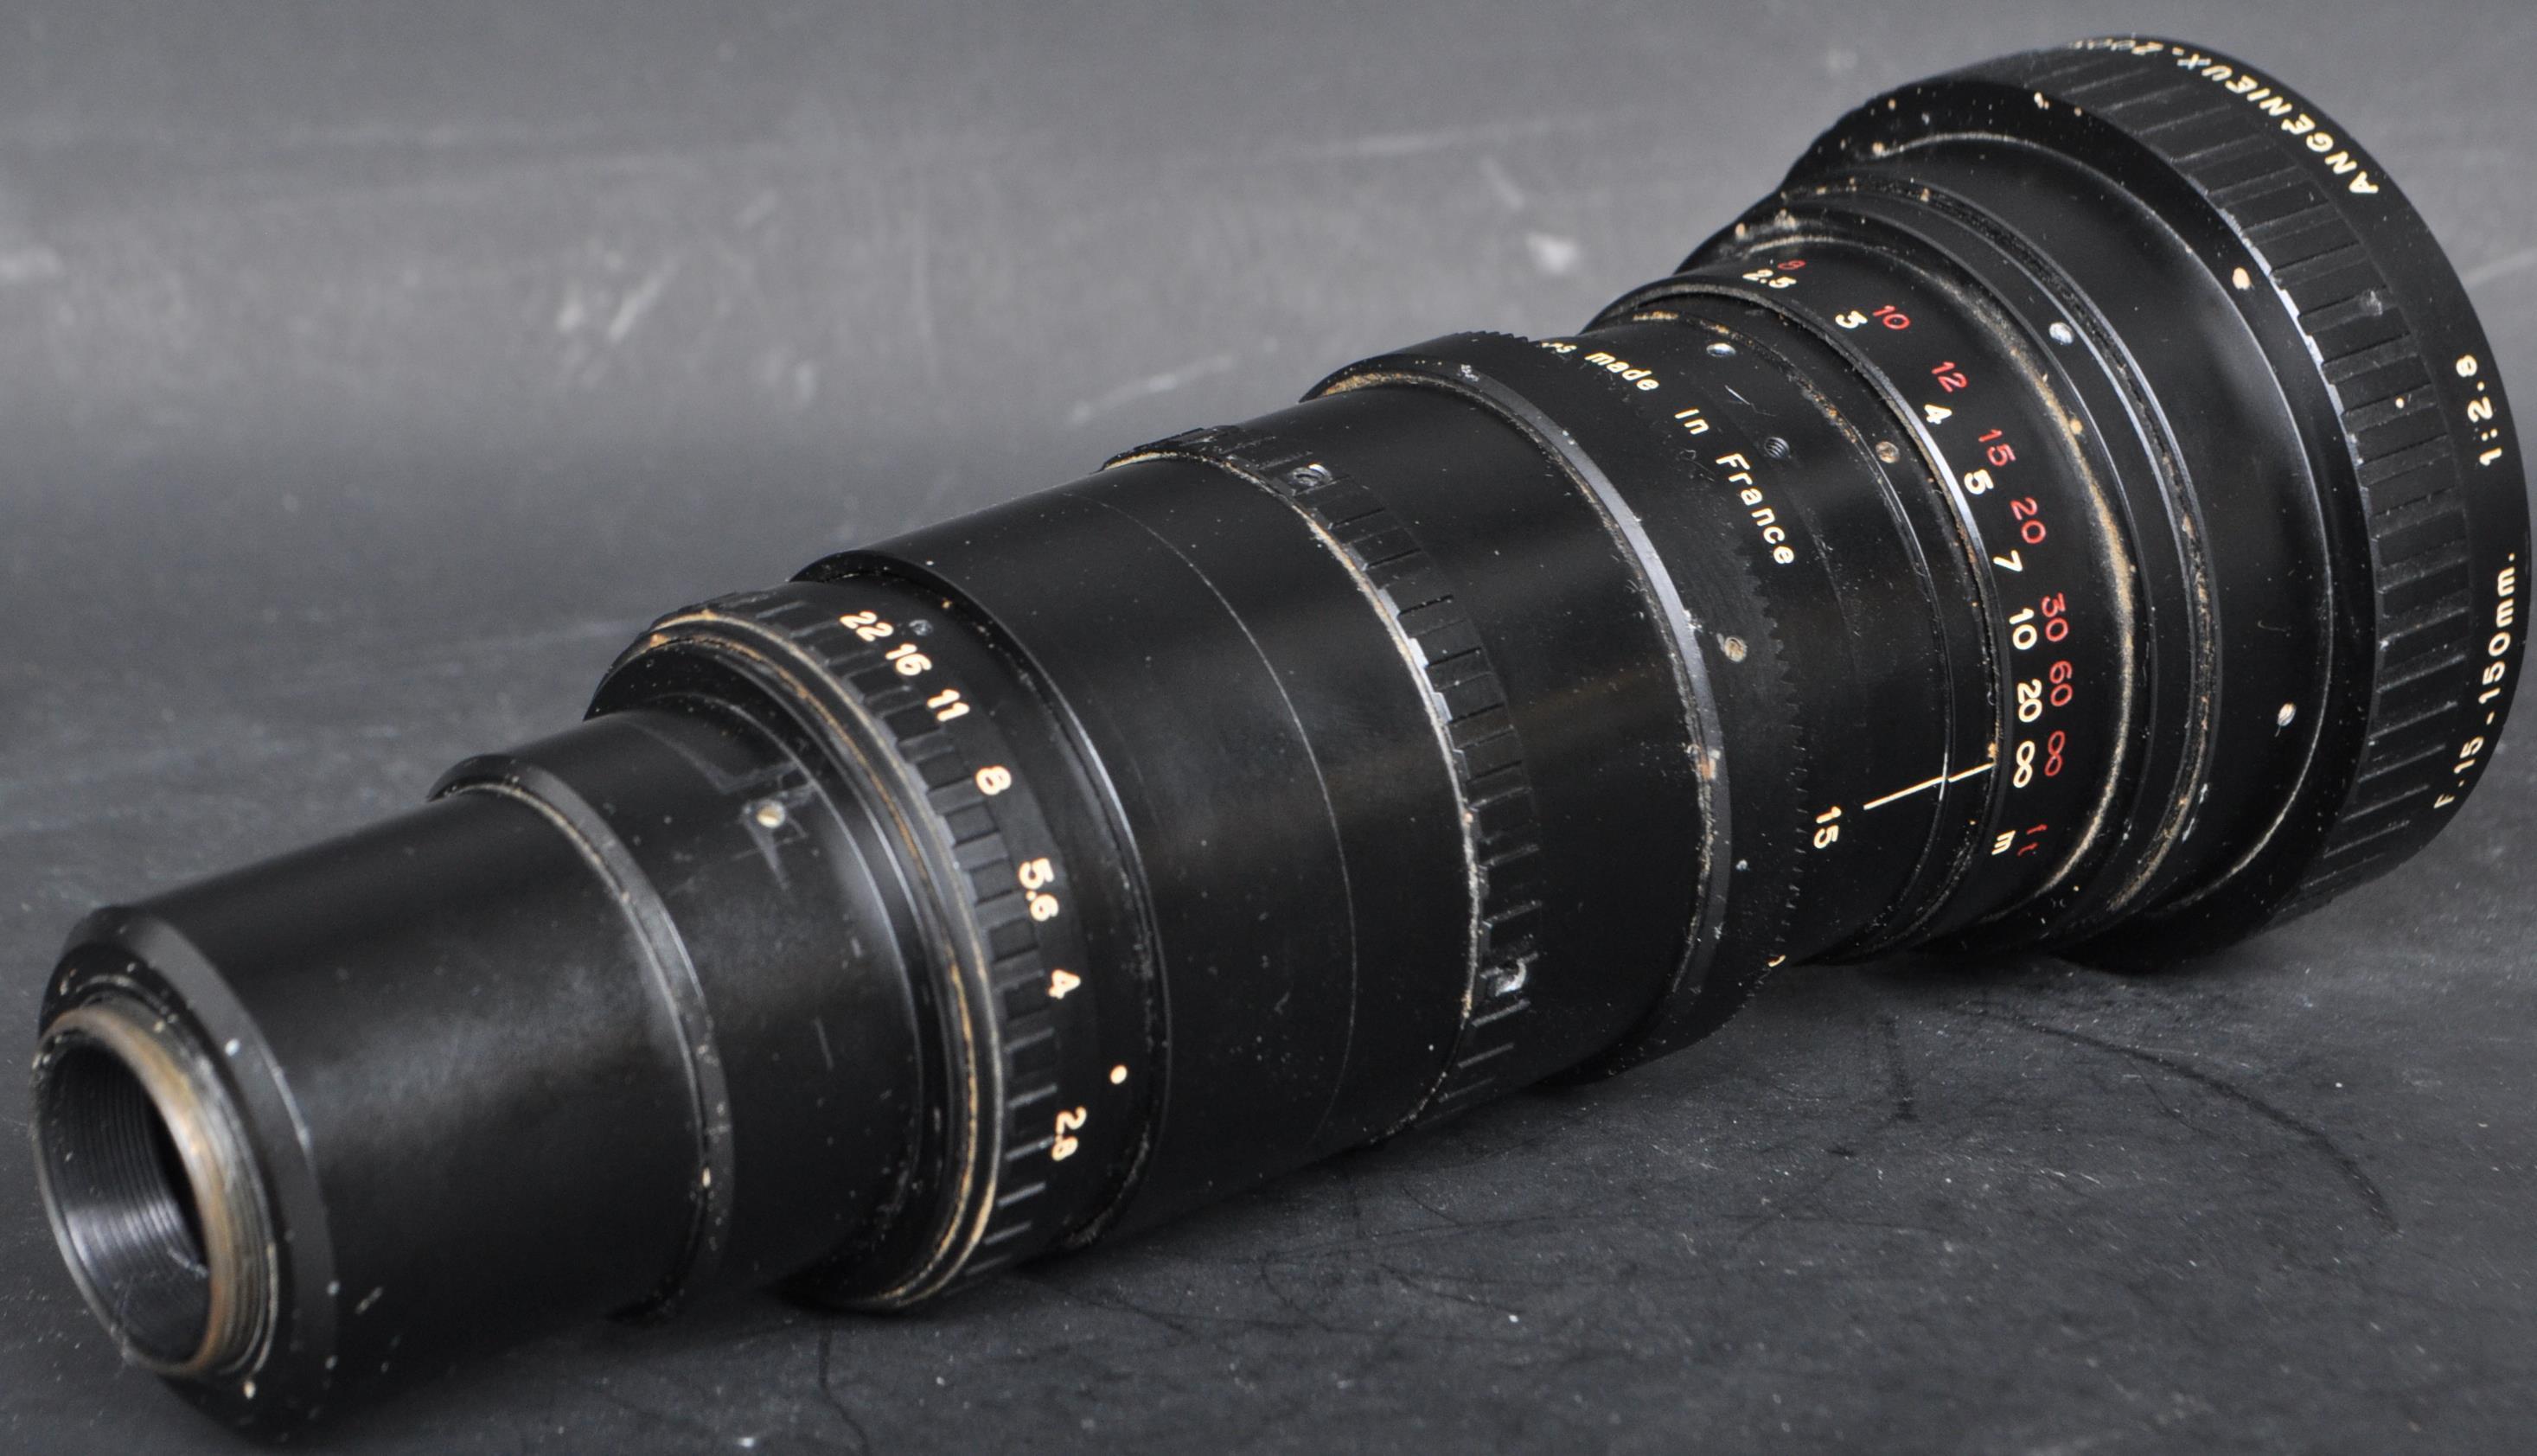 CONTEMPORARY ANGENIEUX ZOOM LENS - 15 - 150MM LENS - Image 3 of 5